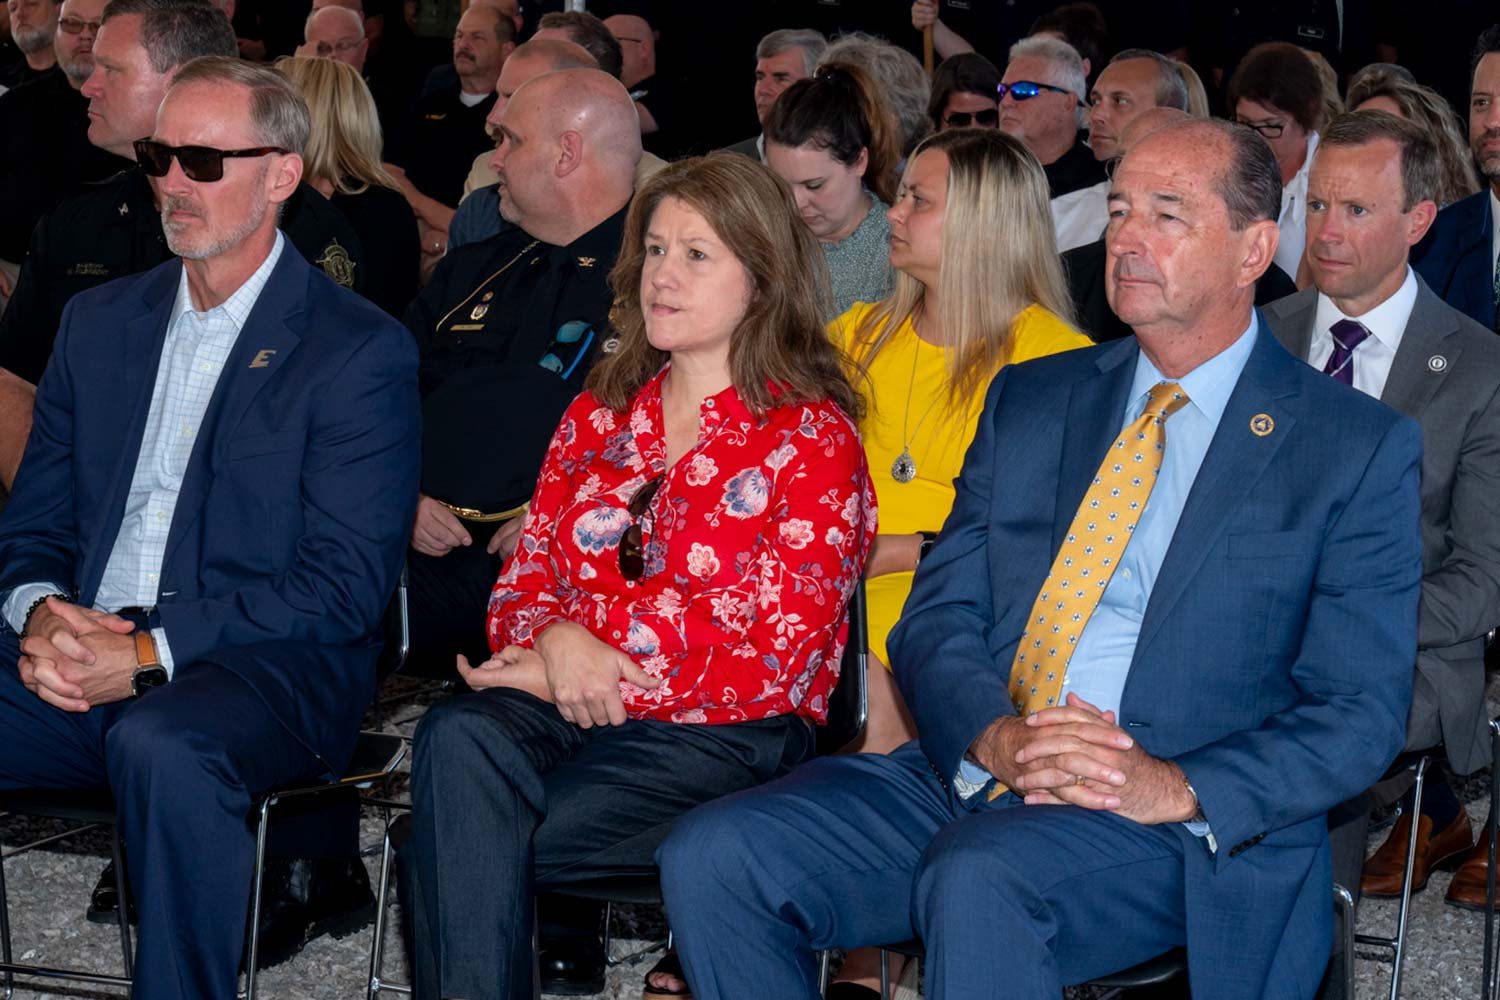  Dean of Eastern Kentucky University College of Justice, Safety &amp; Military Science Derek Paulsen, left, Kentucky Representative Deanna Frazier Gordon (R-Madison), and Senior Advisor to the Governor Rocky Adkins were among guests in attendance at 